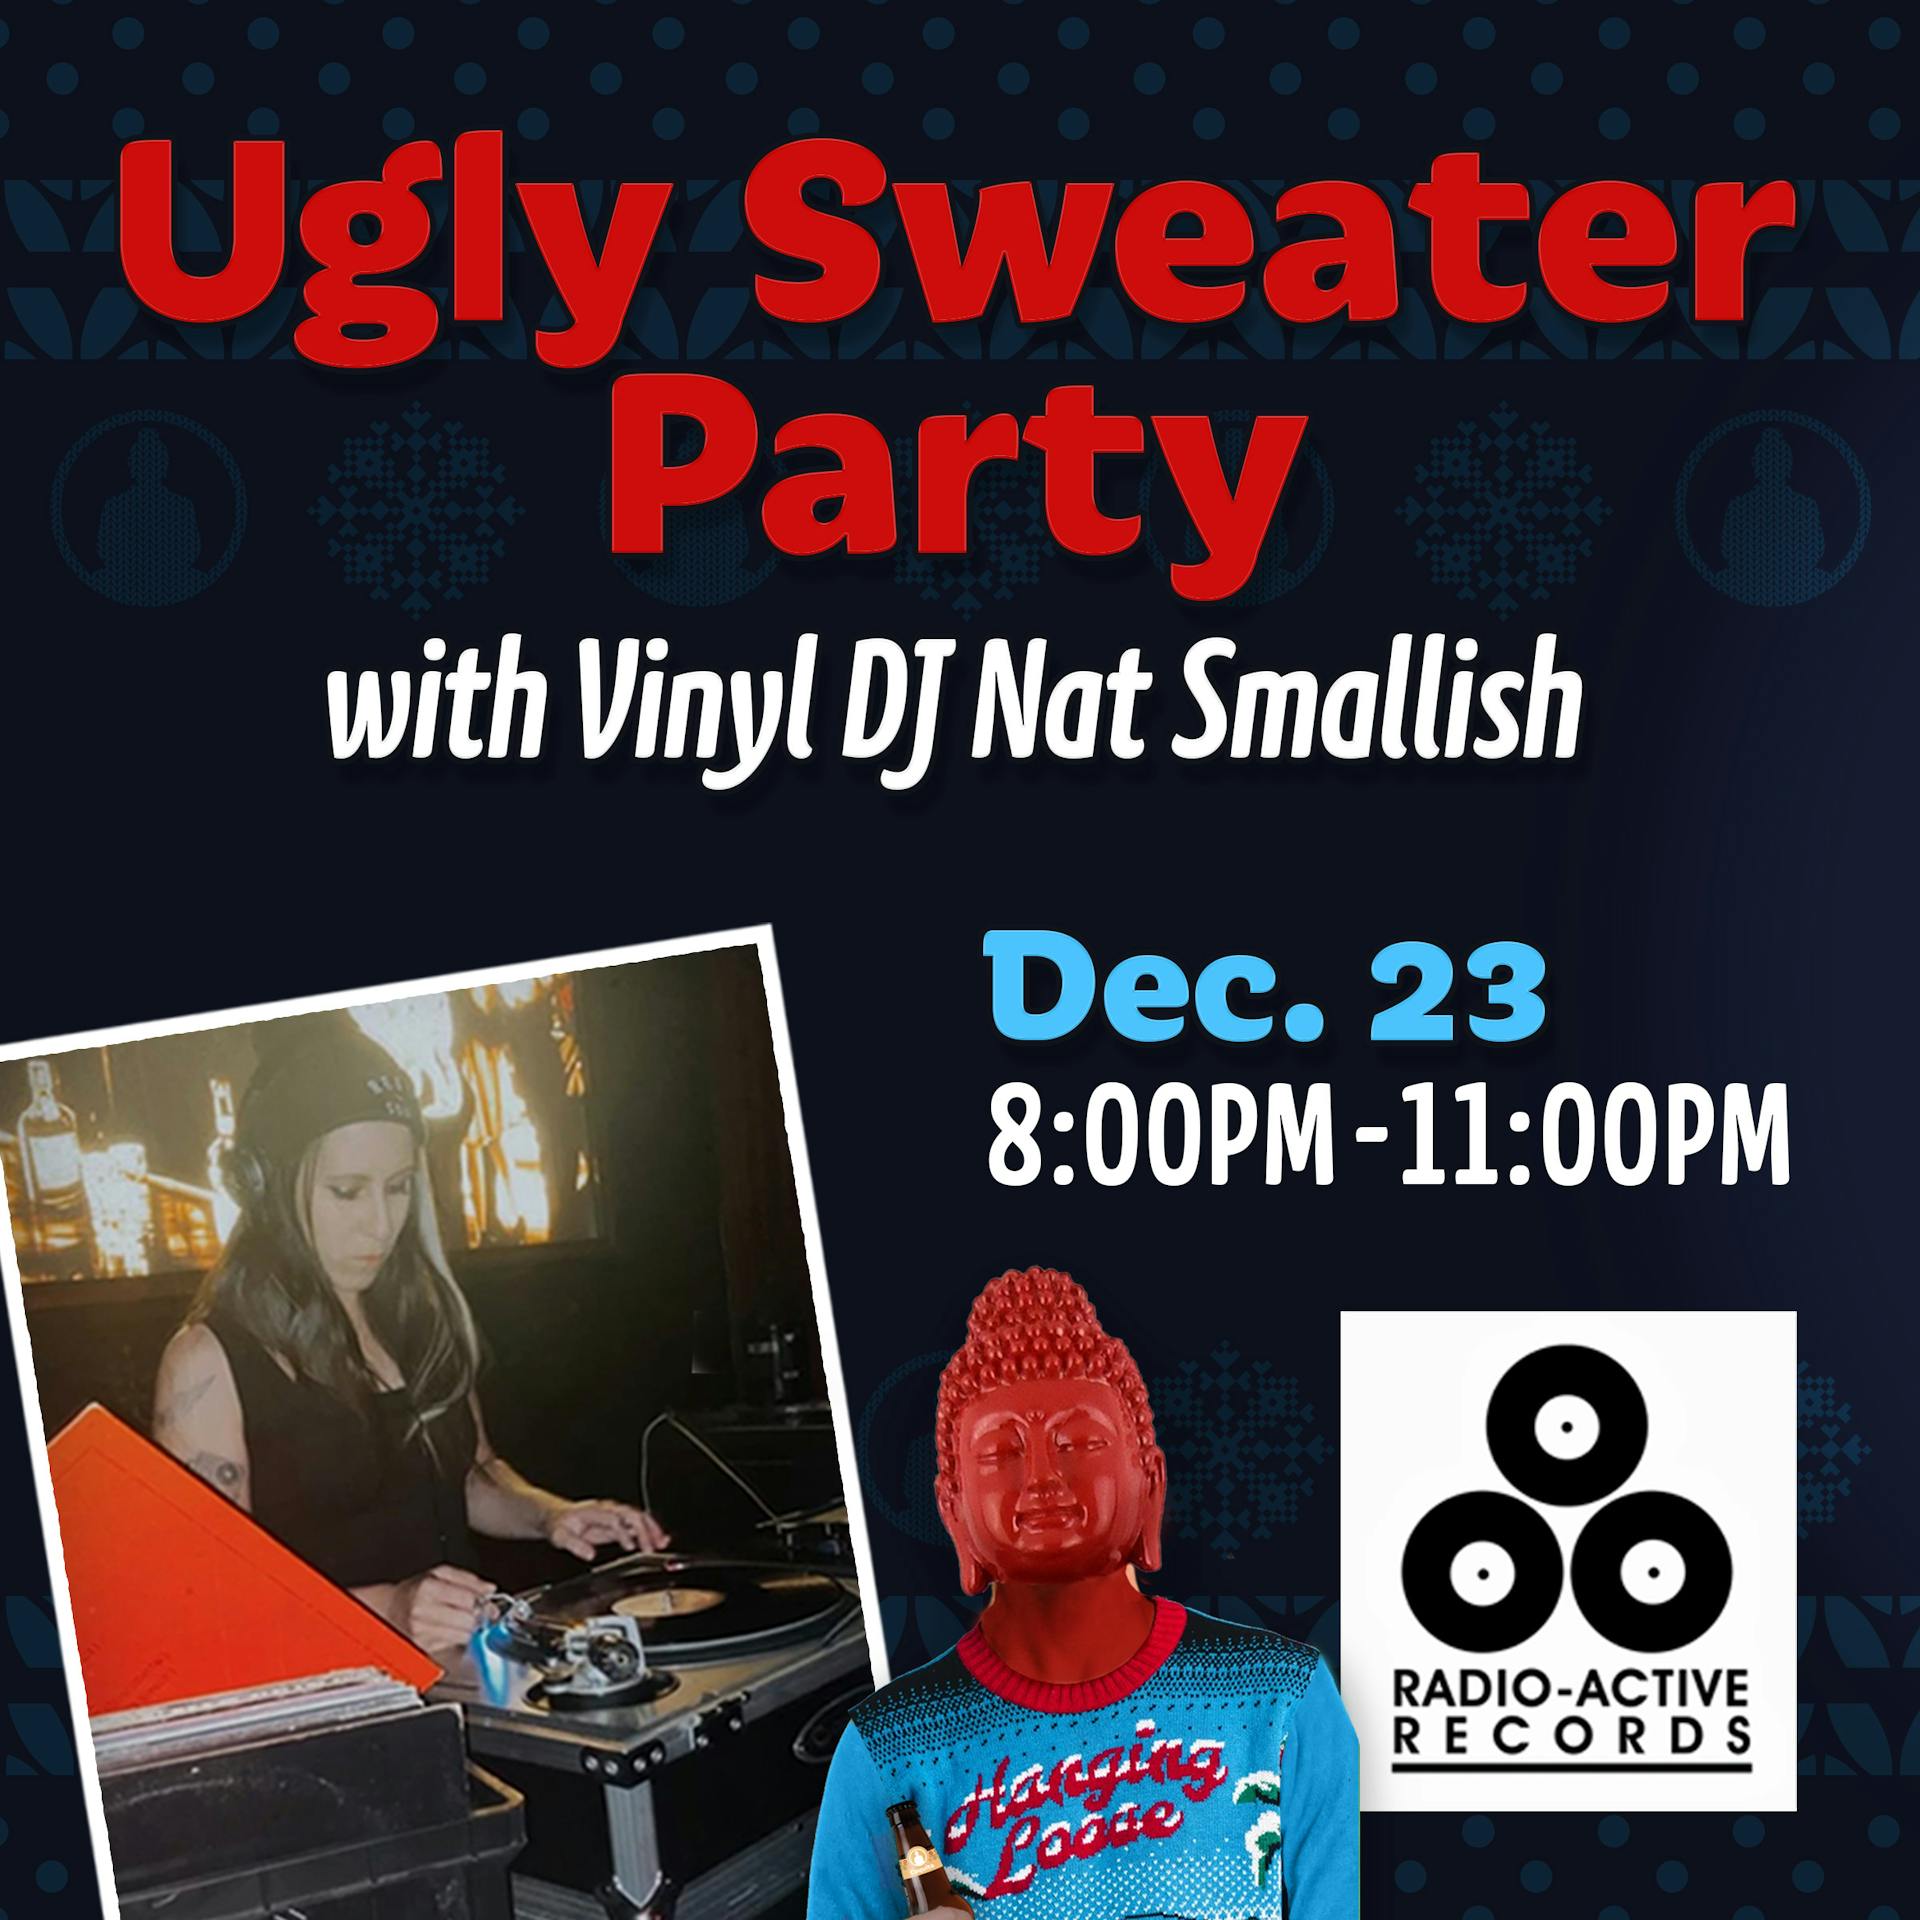 Ugly Sweater Party with Vinyl DJ set